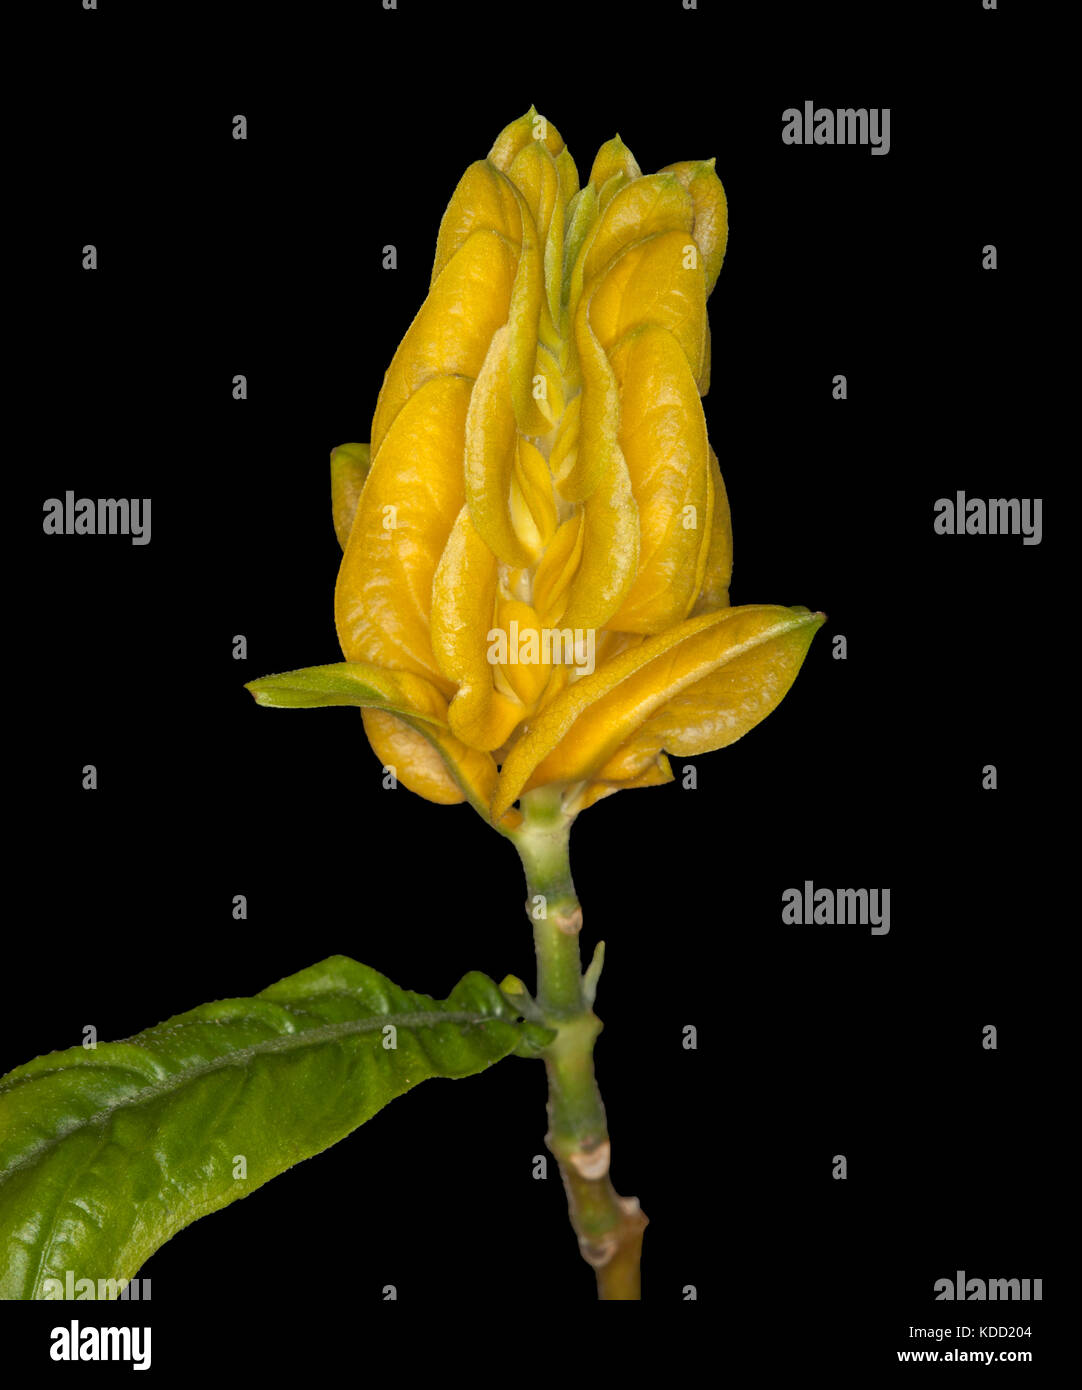 Vivid yellow flower bracts and emerald green leaf of flowering shrub Pachystachys lutea, Golden Candles, on black background Stock Photo